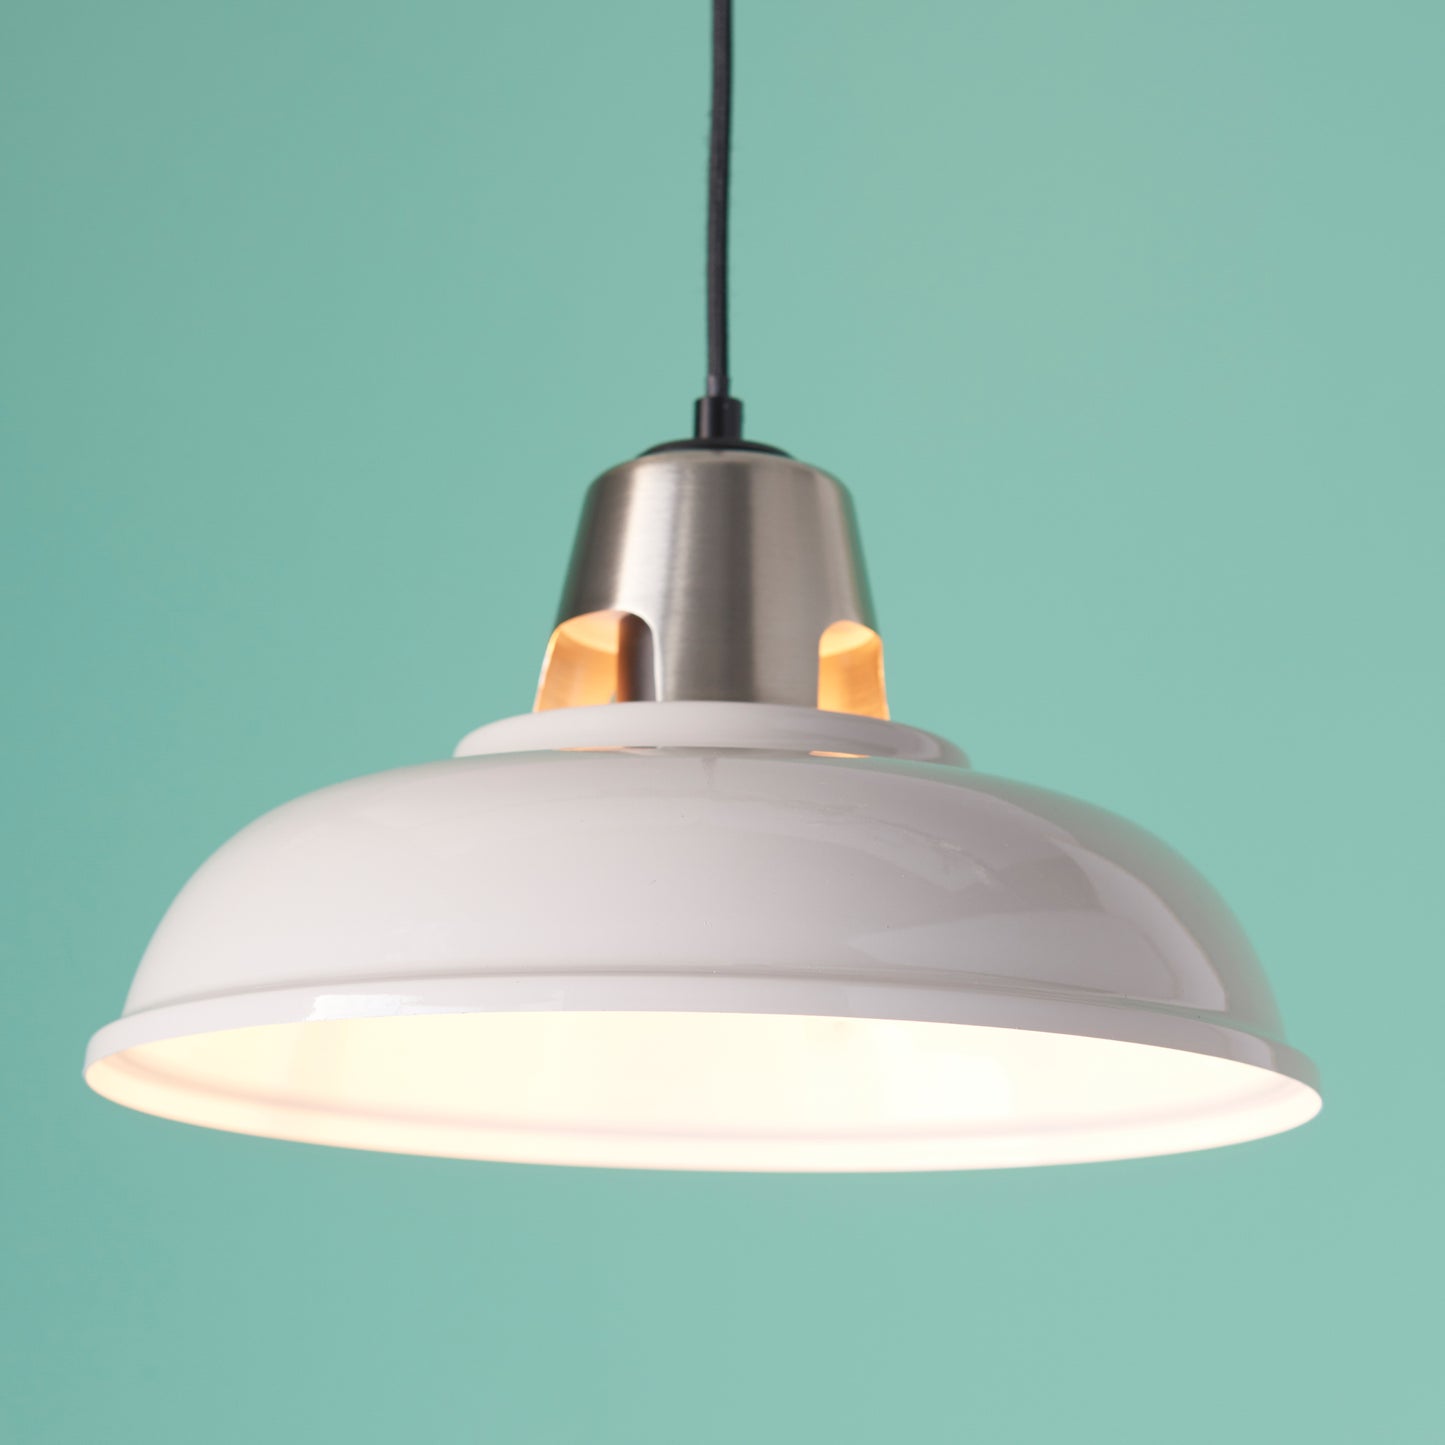 A white Staverton Shade Taupe pendant light hanging on a turquoise background, adding elegance to your interior decor.